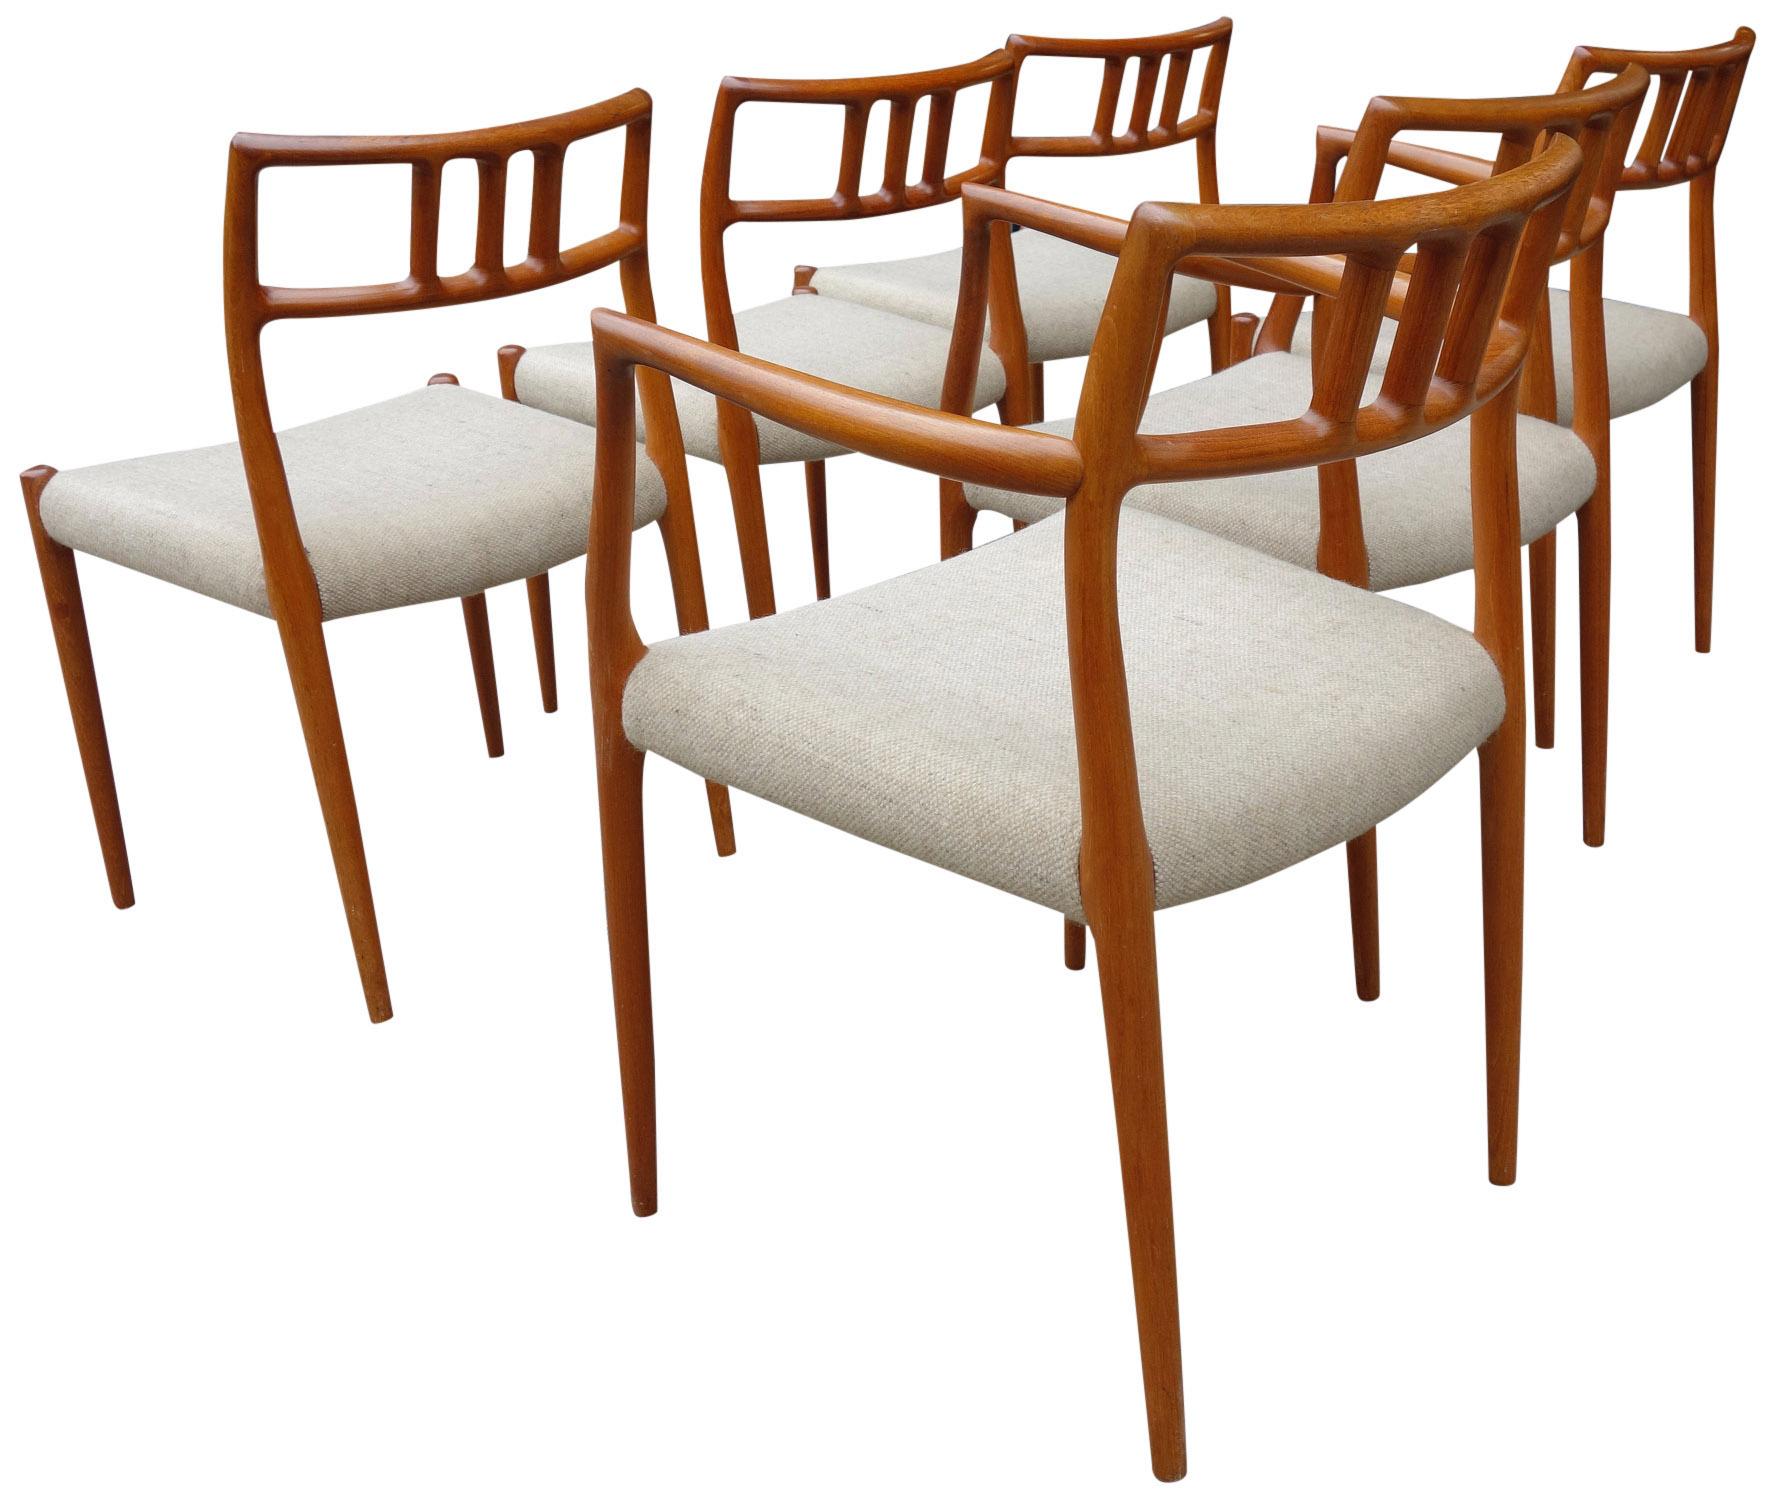 For your consideration is this wonderful set of 6 Moller chairs in teak wood. These iconic Scandinavian designed chairs are in original and ready to use condition.